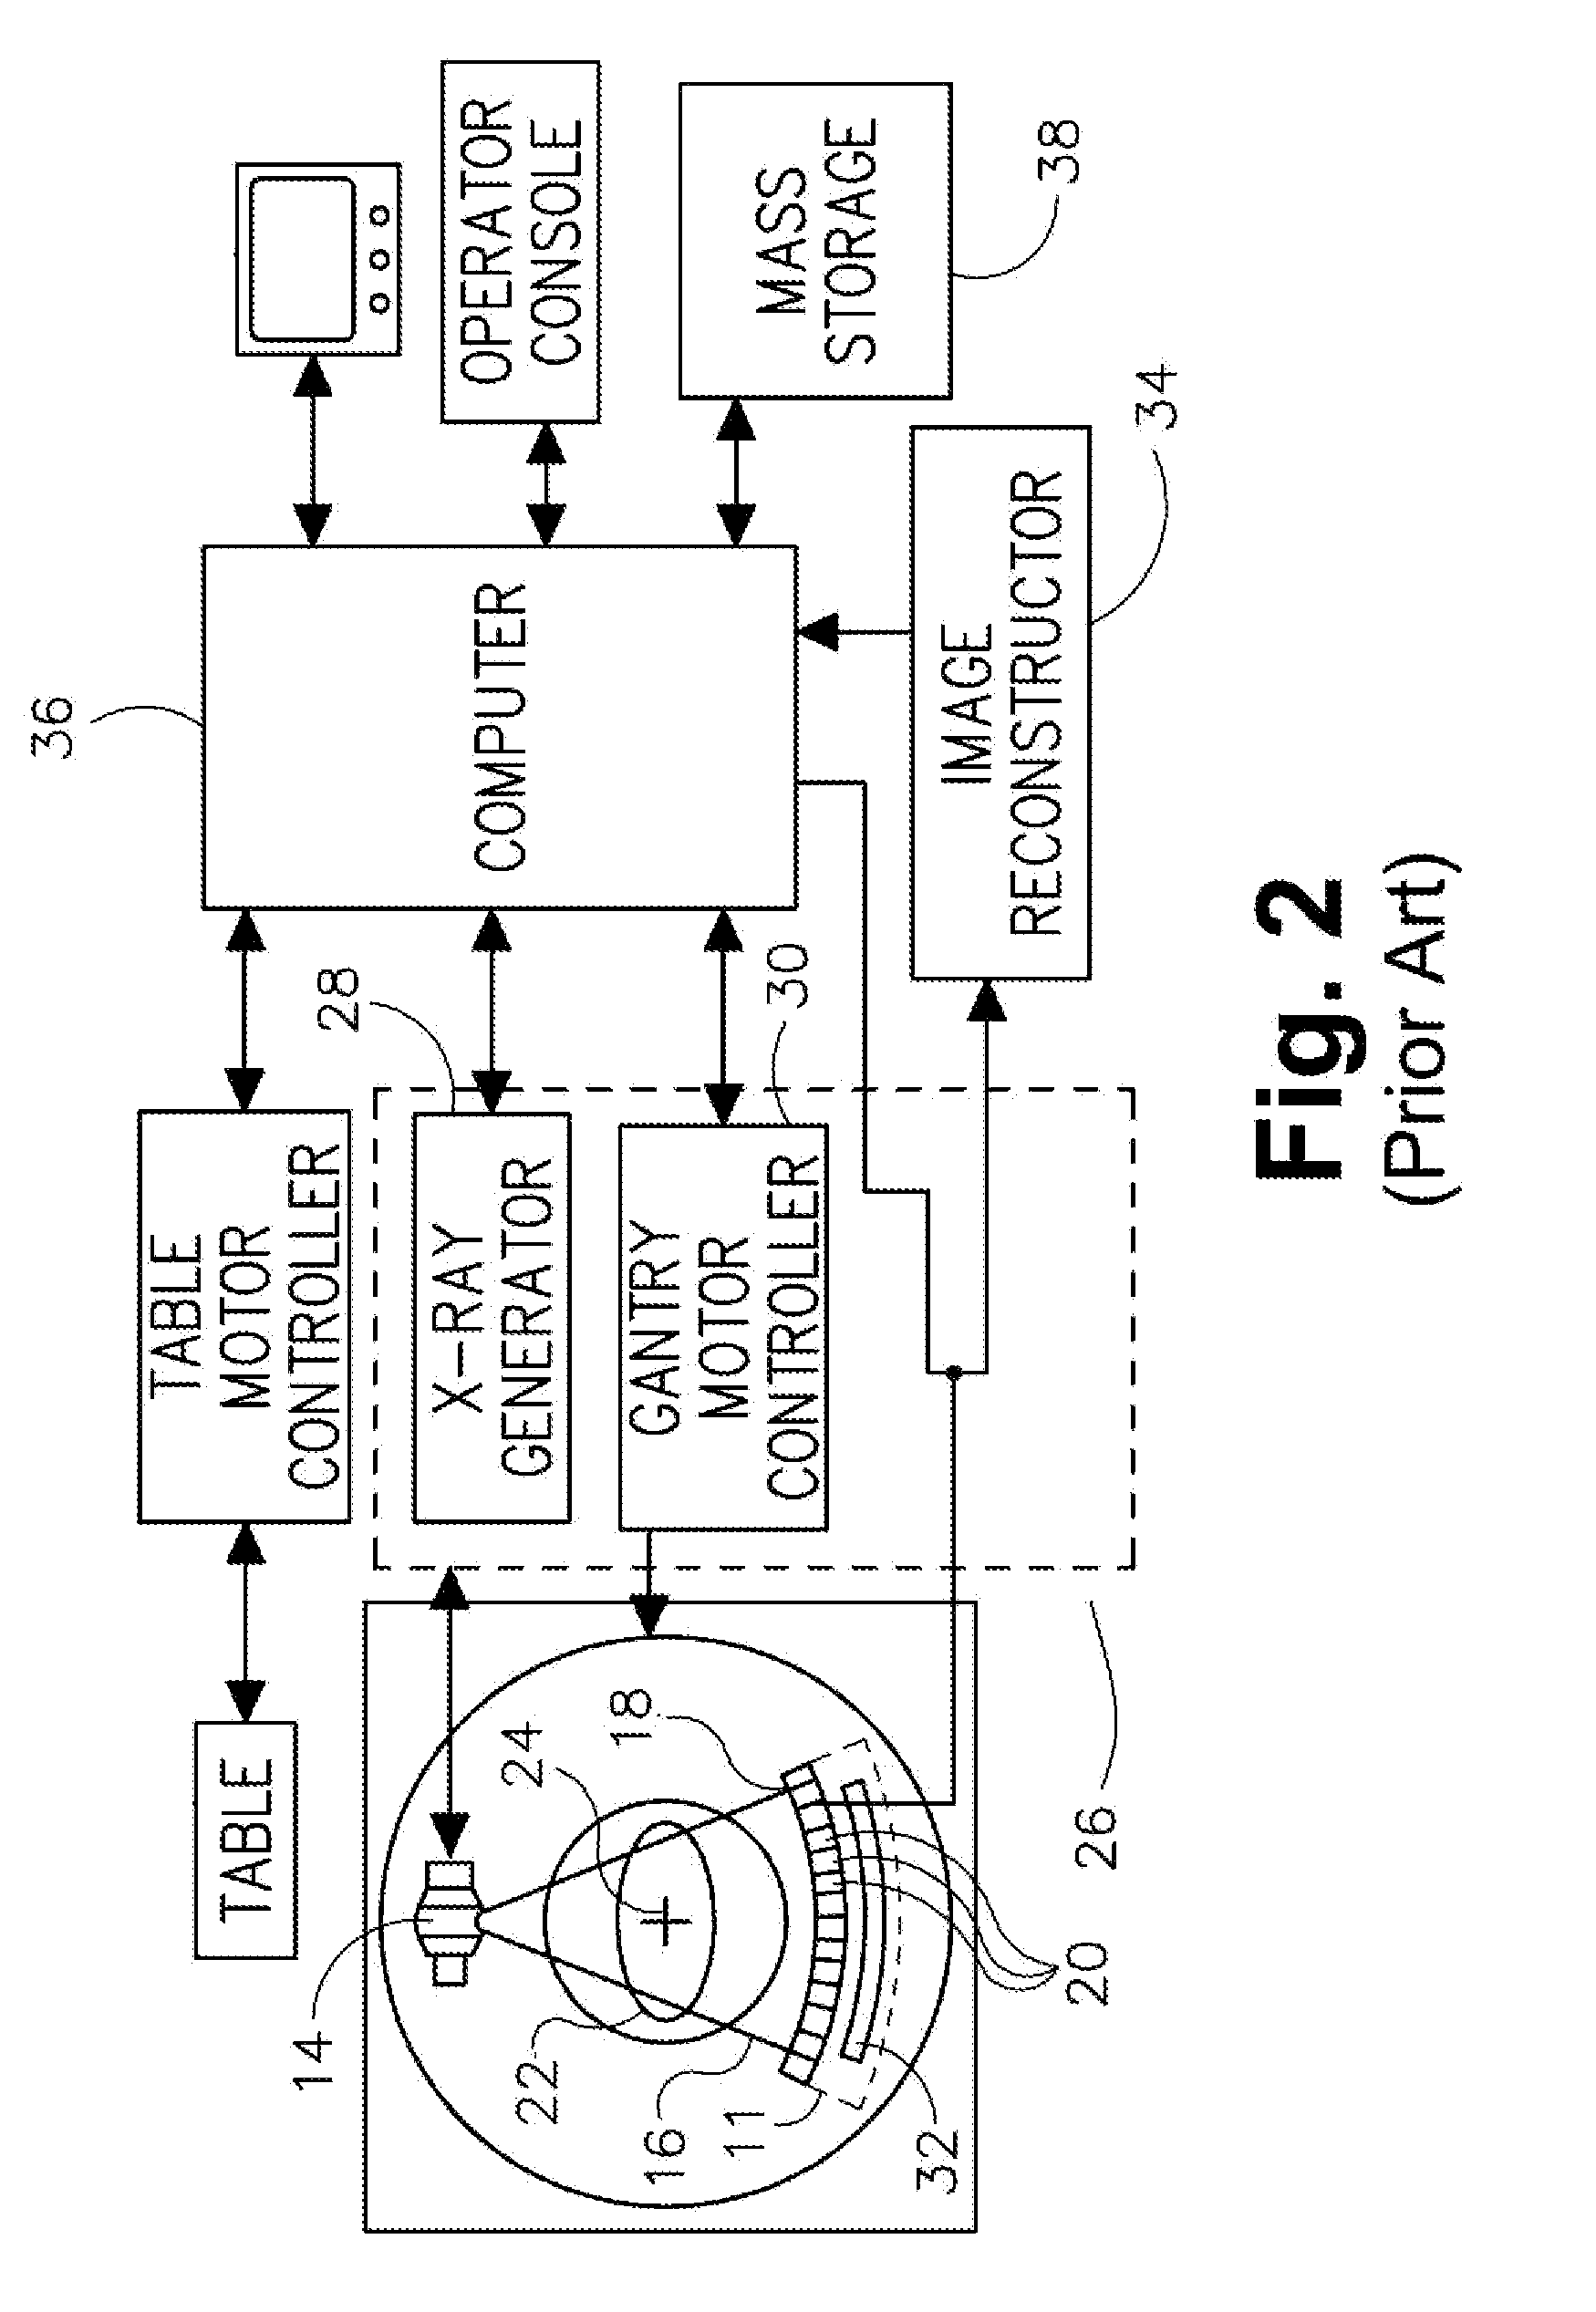 Integrated Direct Conversion Detector Module